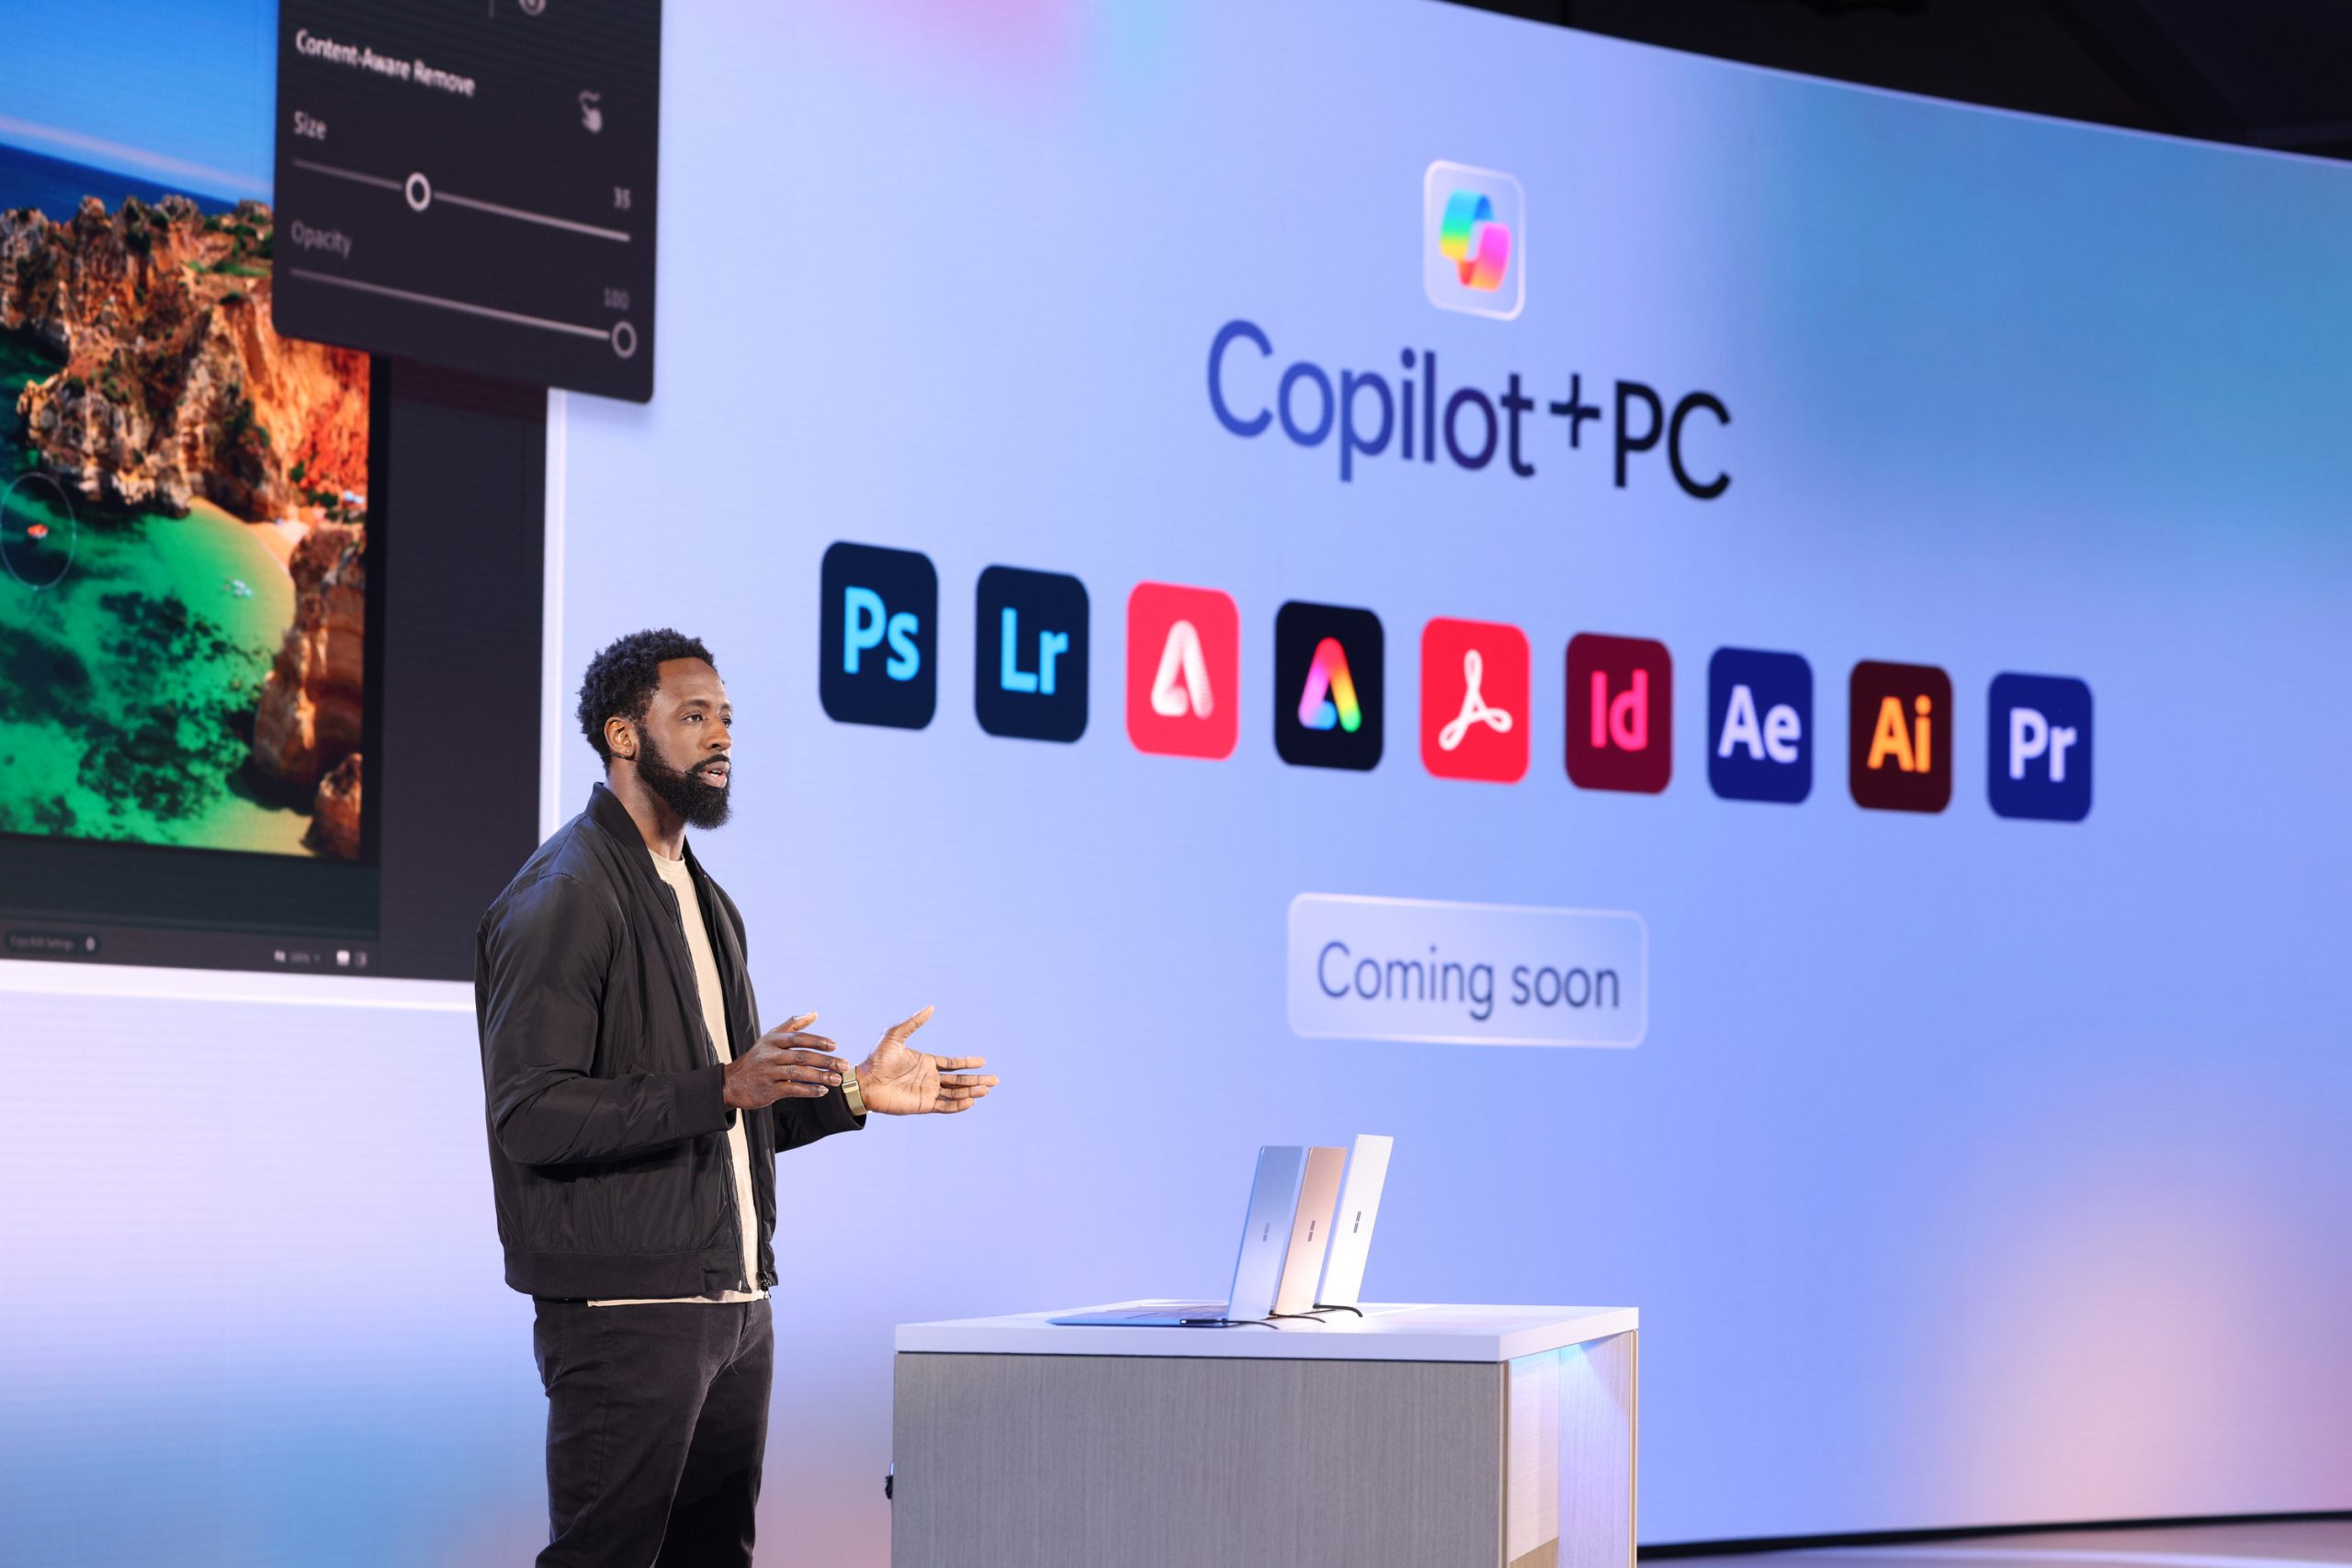 A man standing on stage in front of an audience with a collection of logos on the screen behind him that represent Copilot+ PC